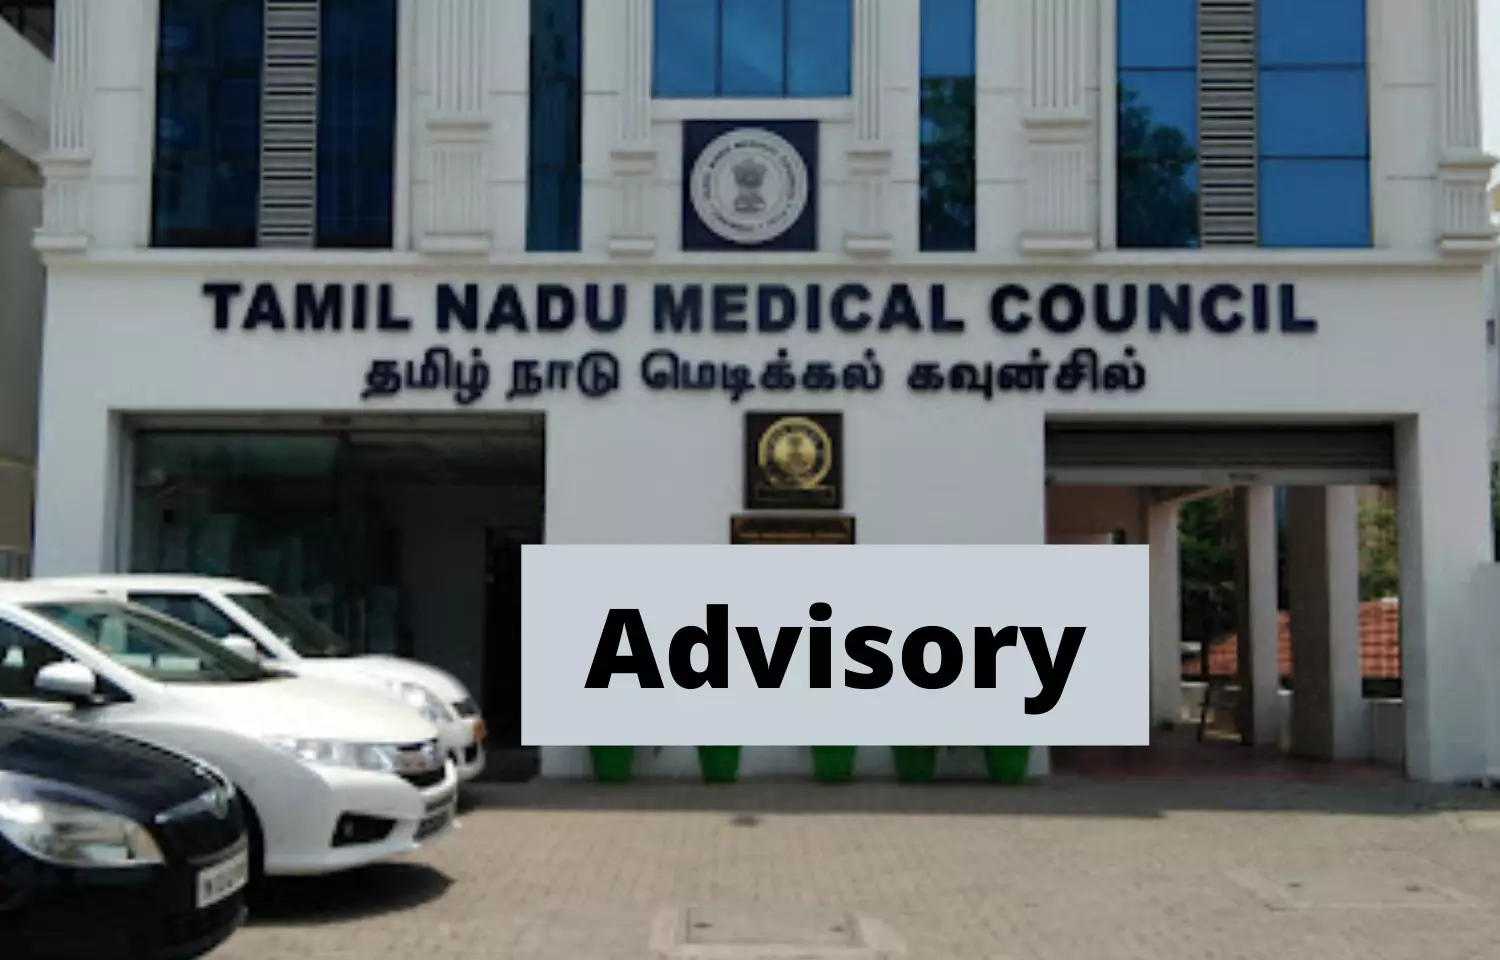 Medical council warning in Tamil Nadu: Doctors not to issue life certificates without knowing someone personally